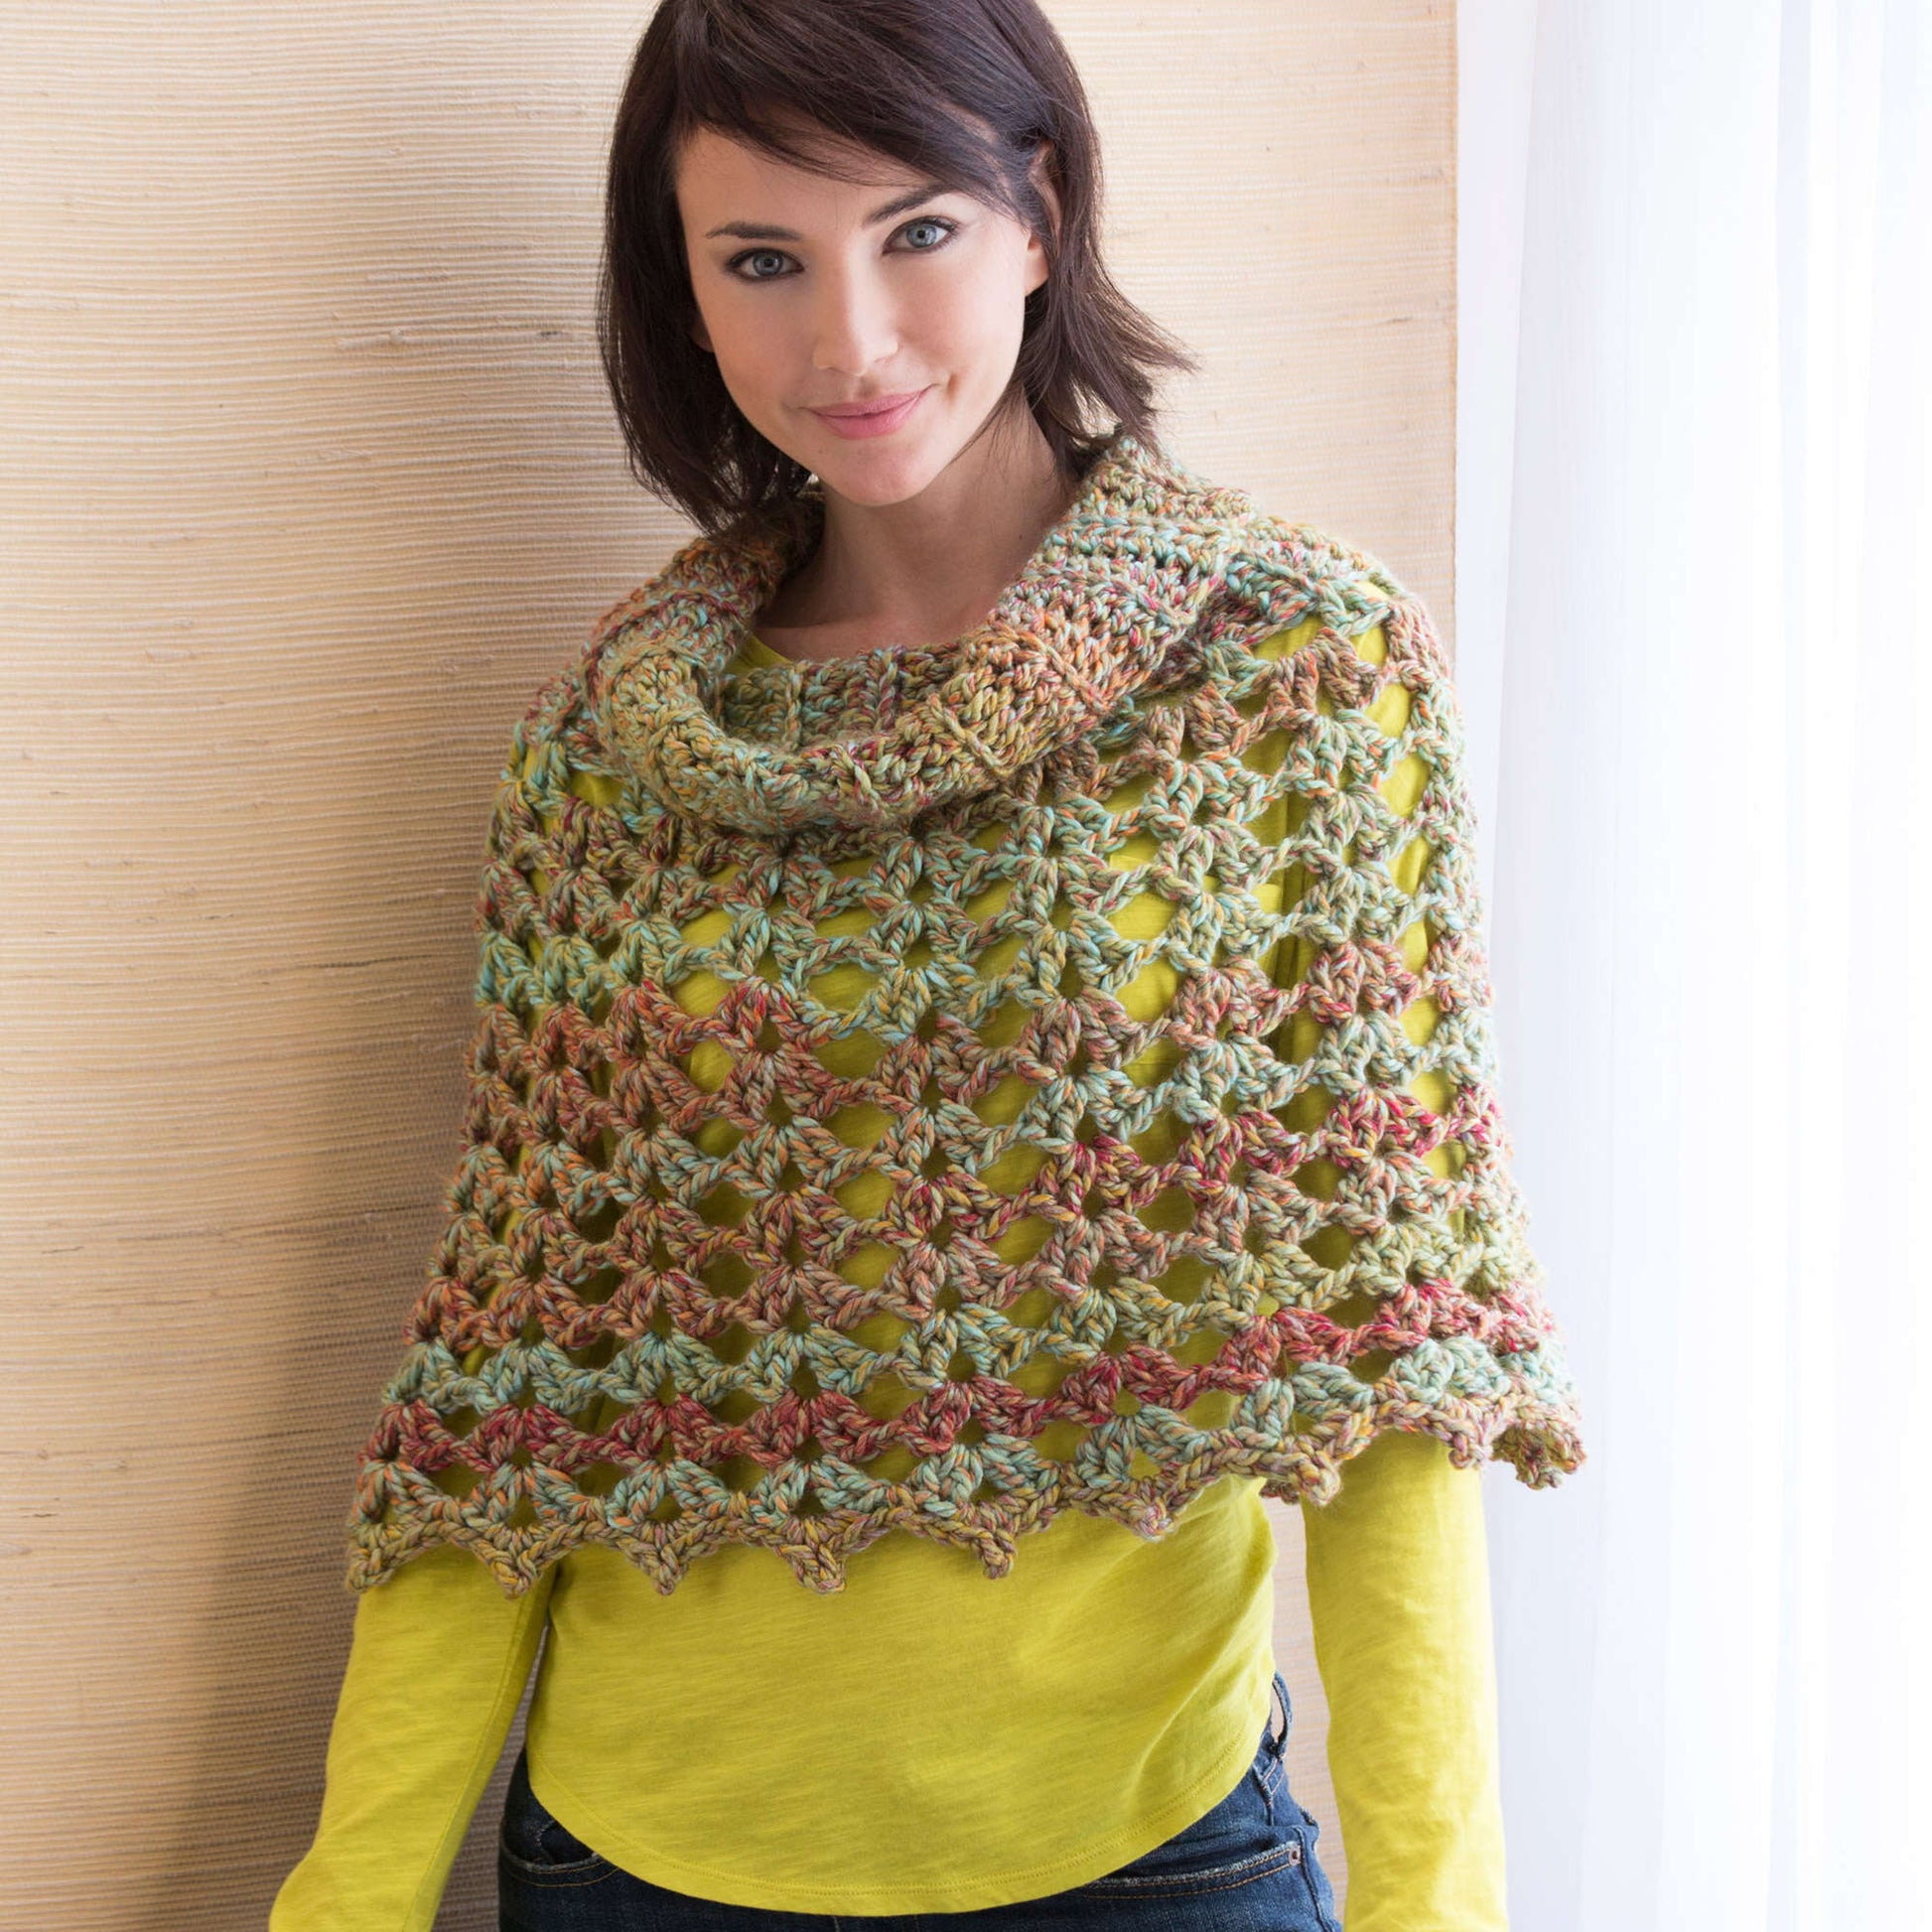 Free Red Heart Chic Cowl Neck Poncho Pattern